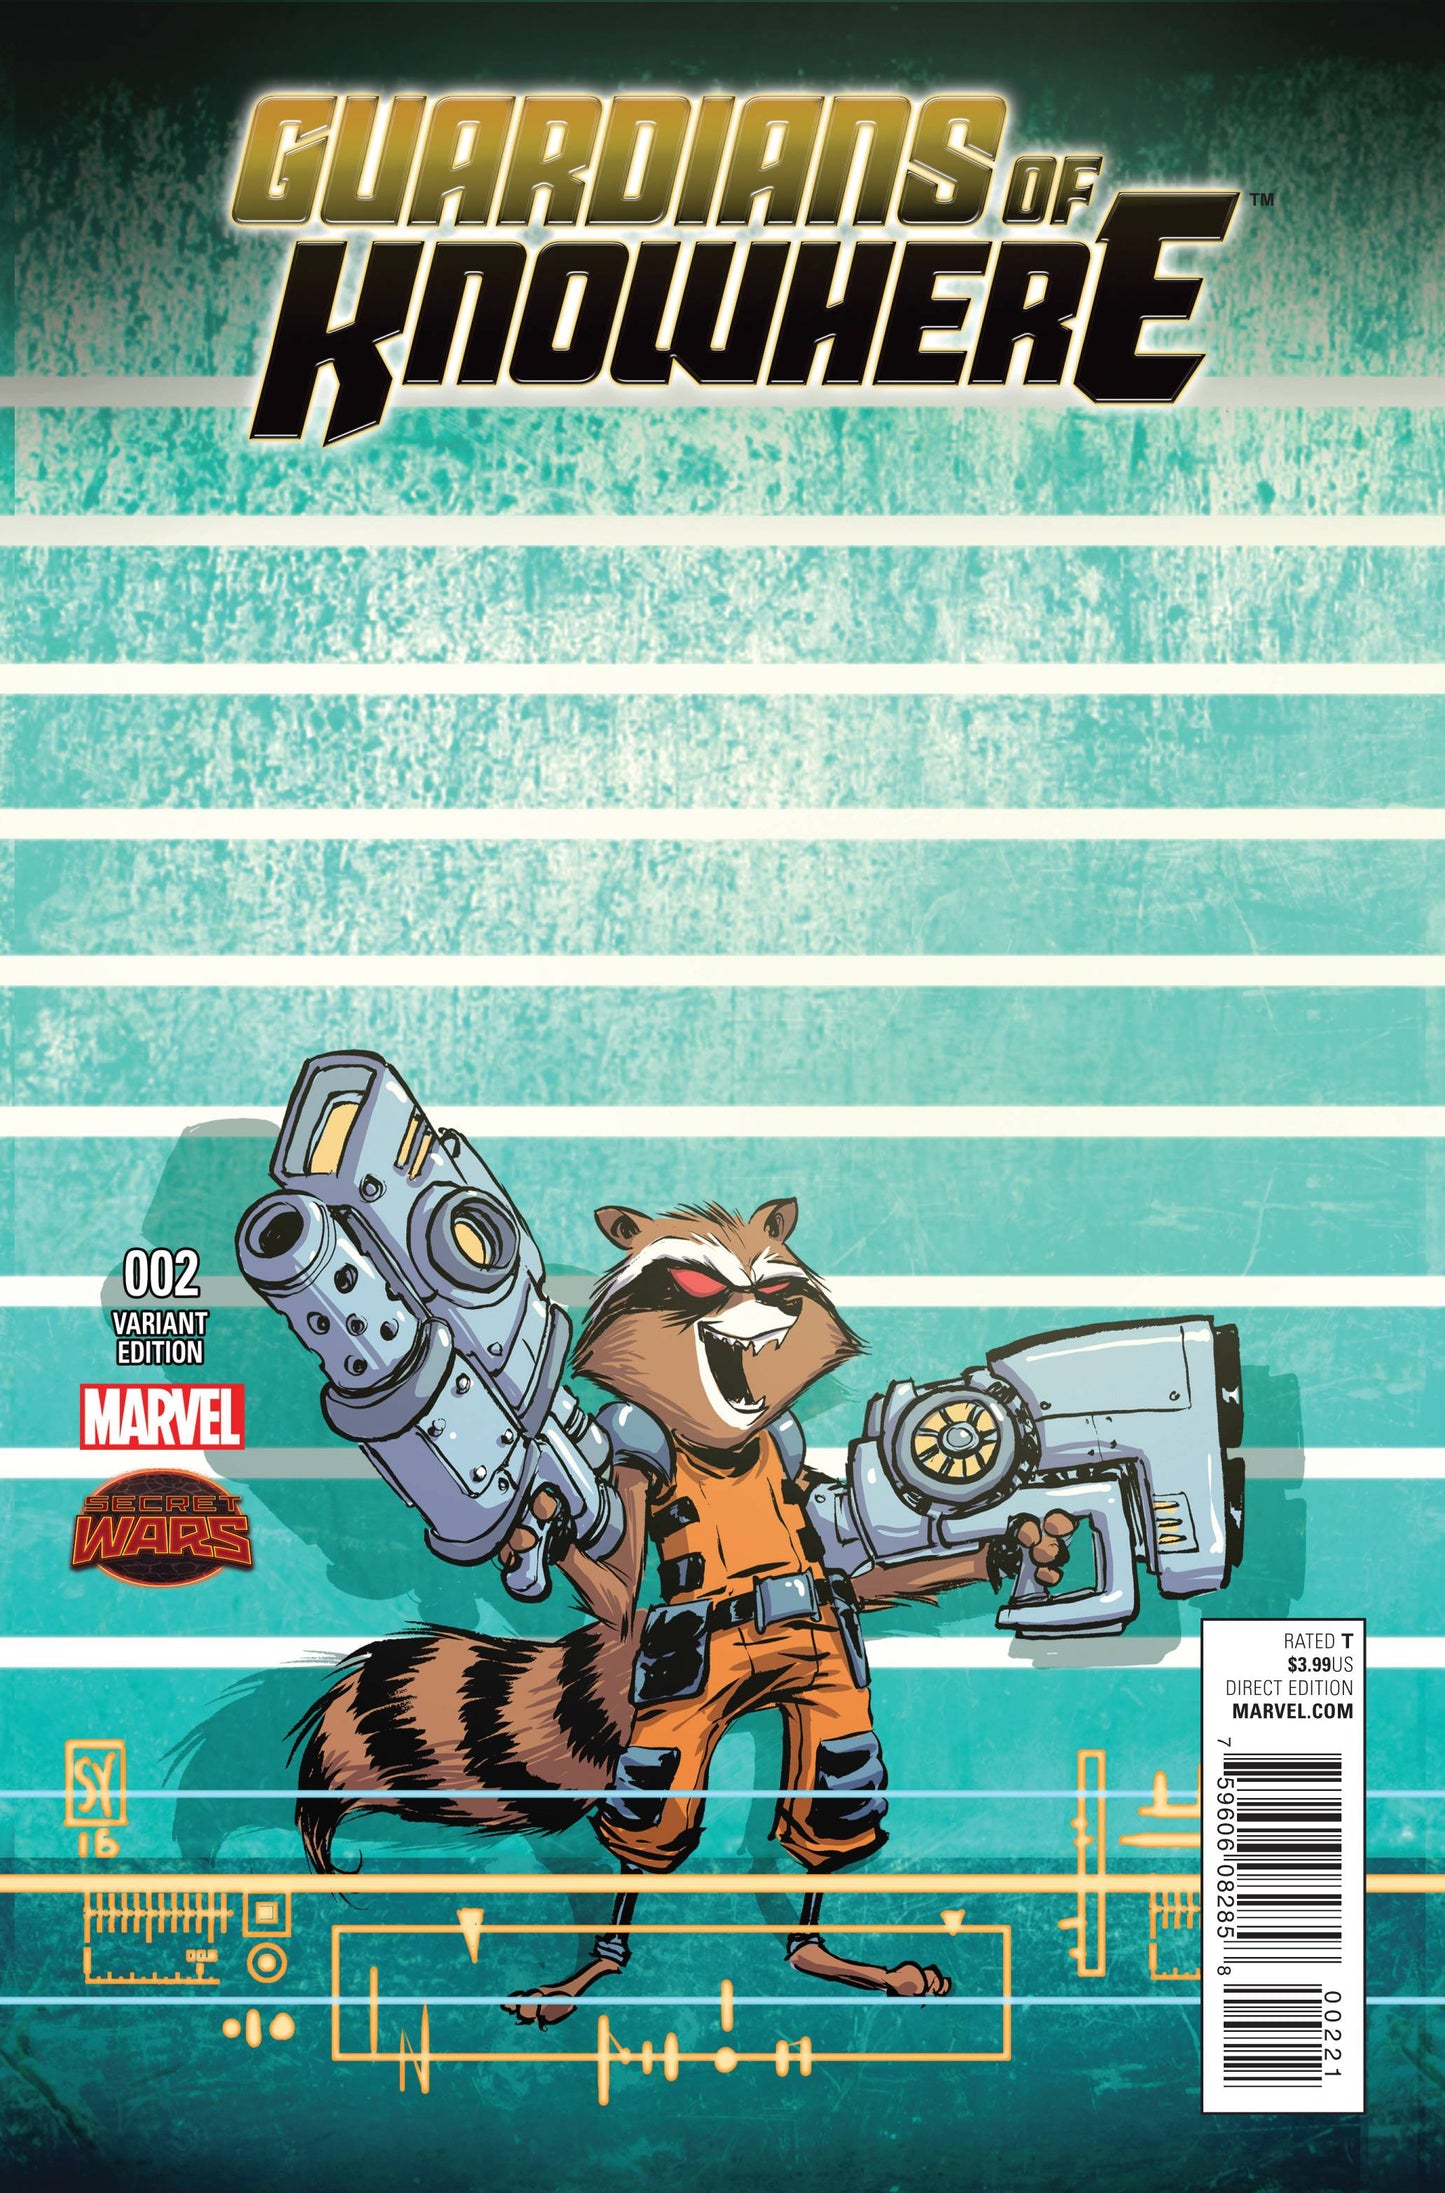 GUARDIANS OF KNOWHERE #2 SKOTTIE YOUNG CONNECTING ROCKET RACCOON VARIANT 2015